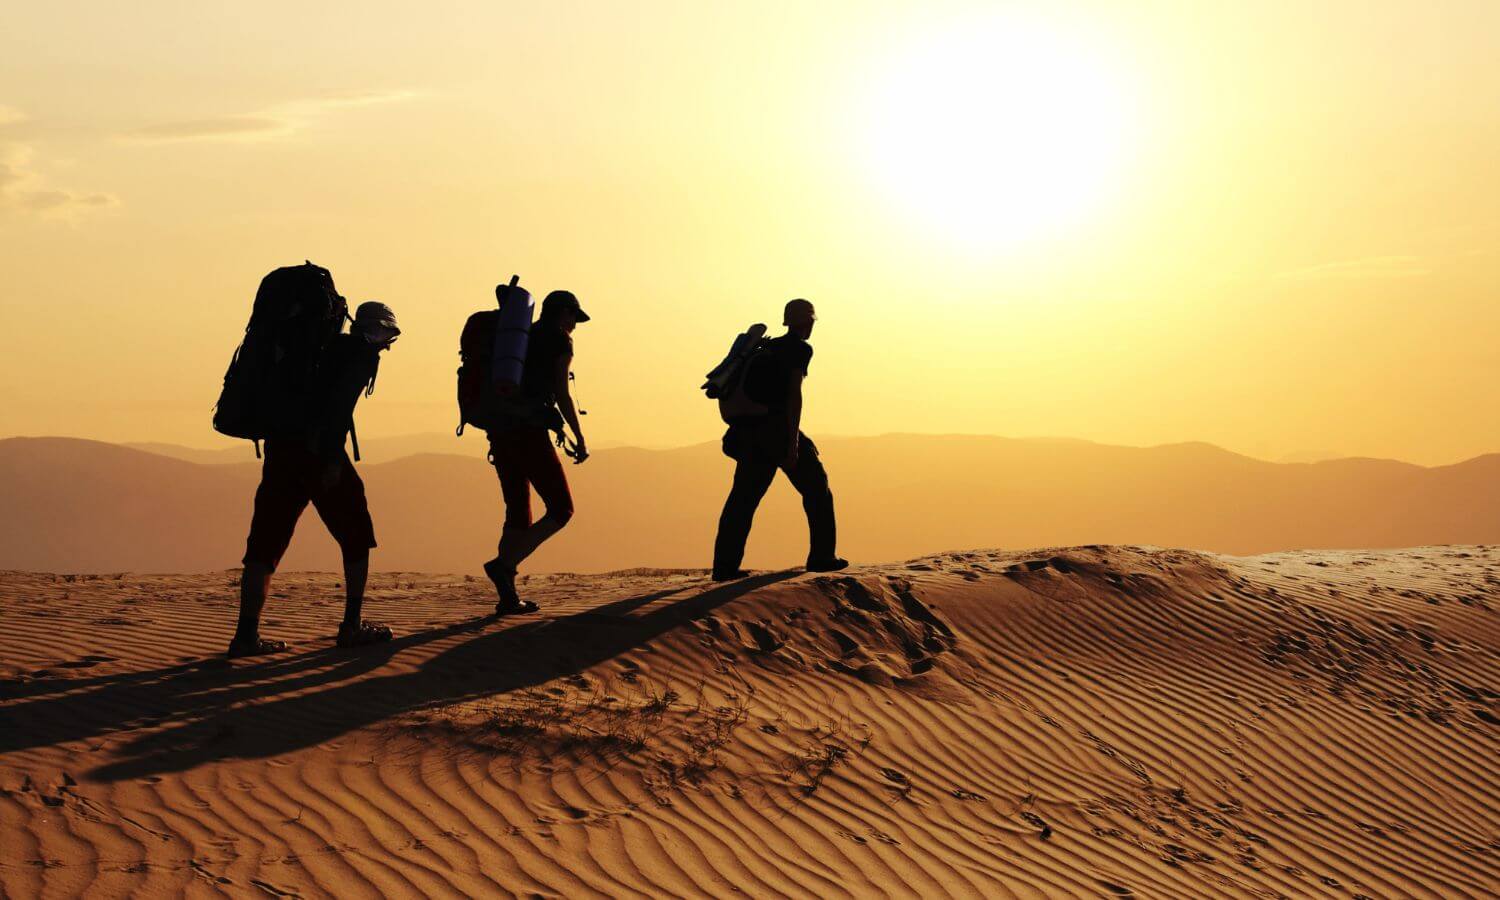 A military family hiking in a desert